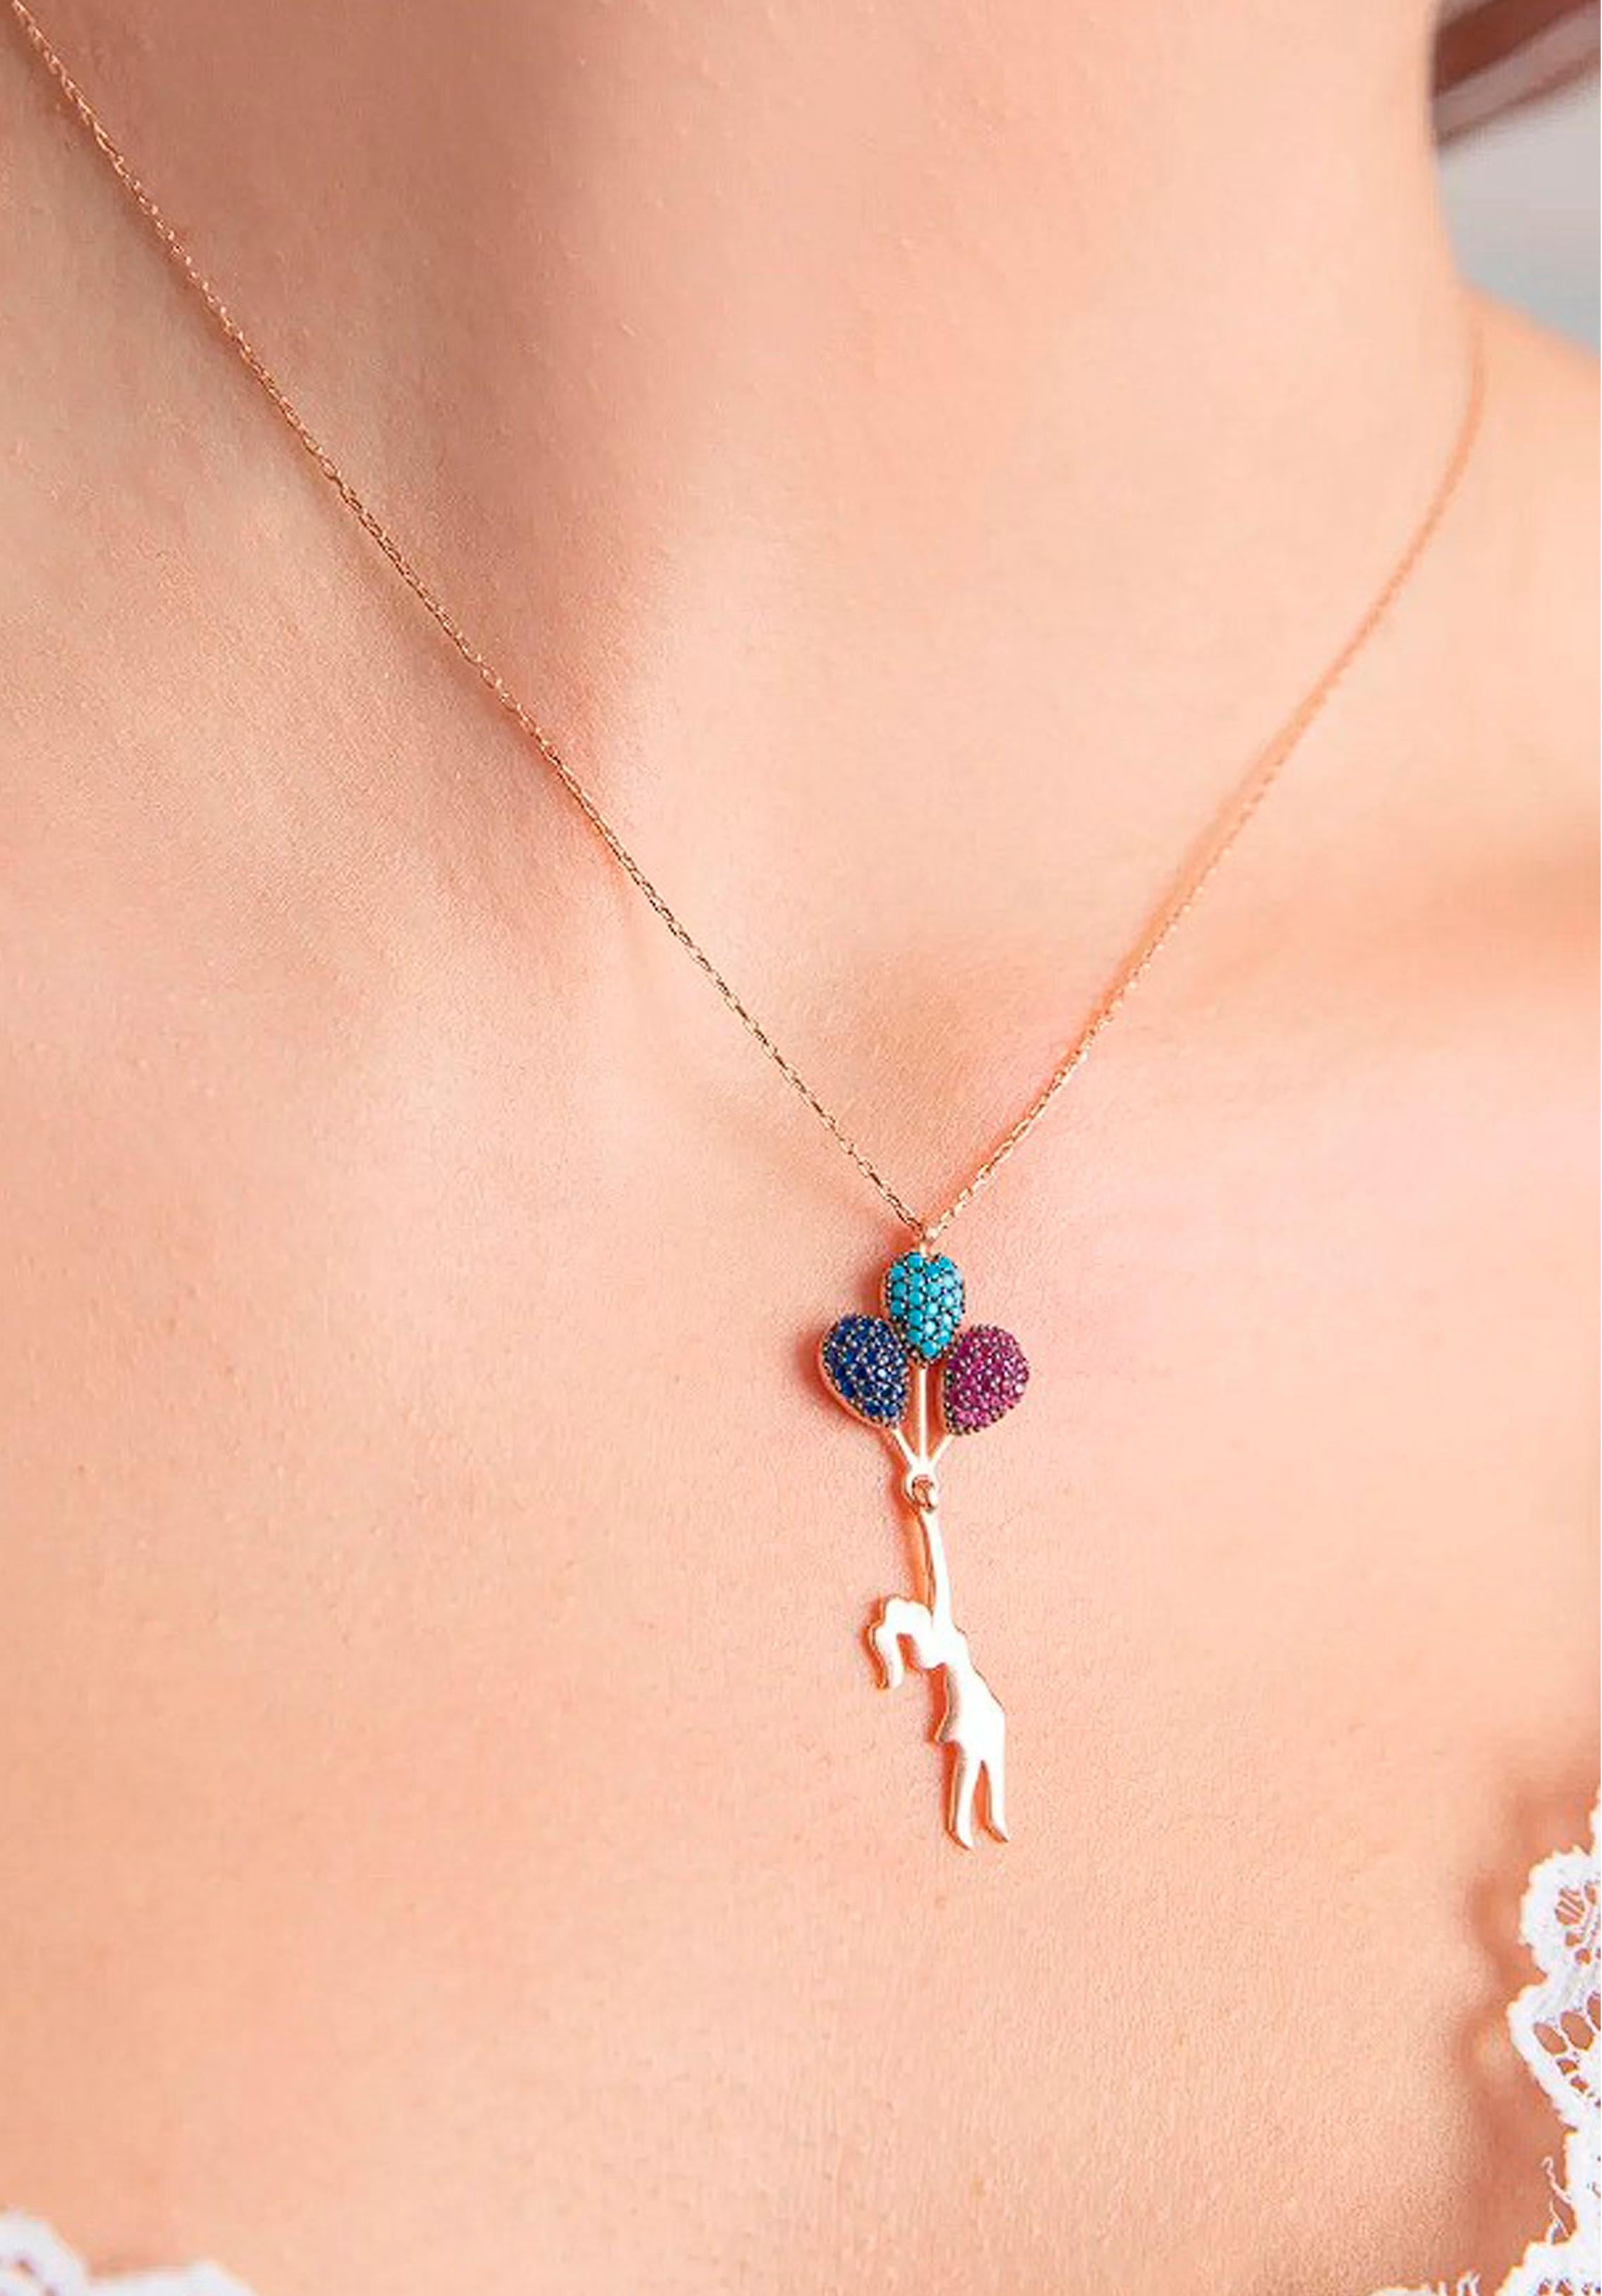 Girl on baloons pendant necklace

Metal: 925 silver
Size :  43 sm (necklace length)
Weight 1.5 gr.

Gemstones:
 colored gemstones - lab sapphires, lab rubies and lab turquose

Pendant will be shipped in 3 days after purchase.